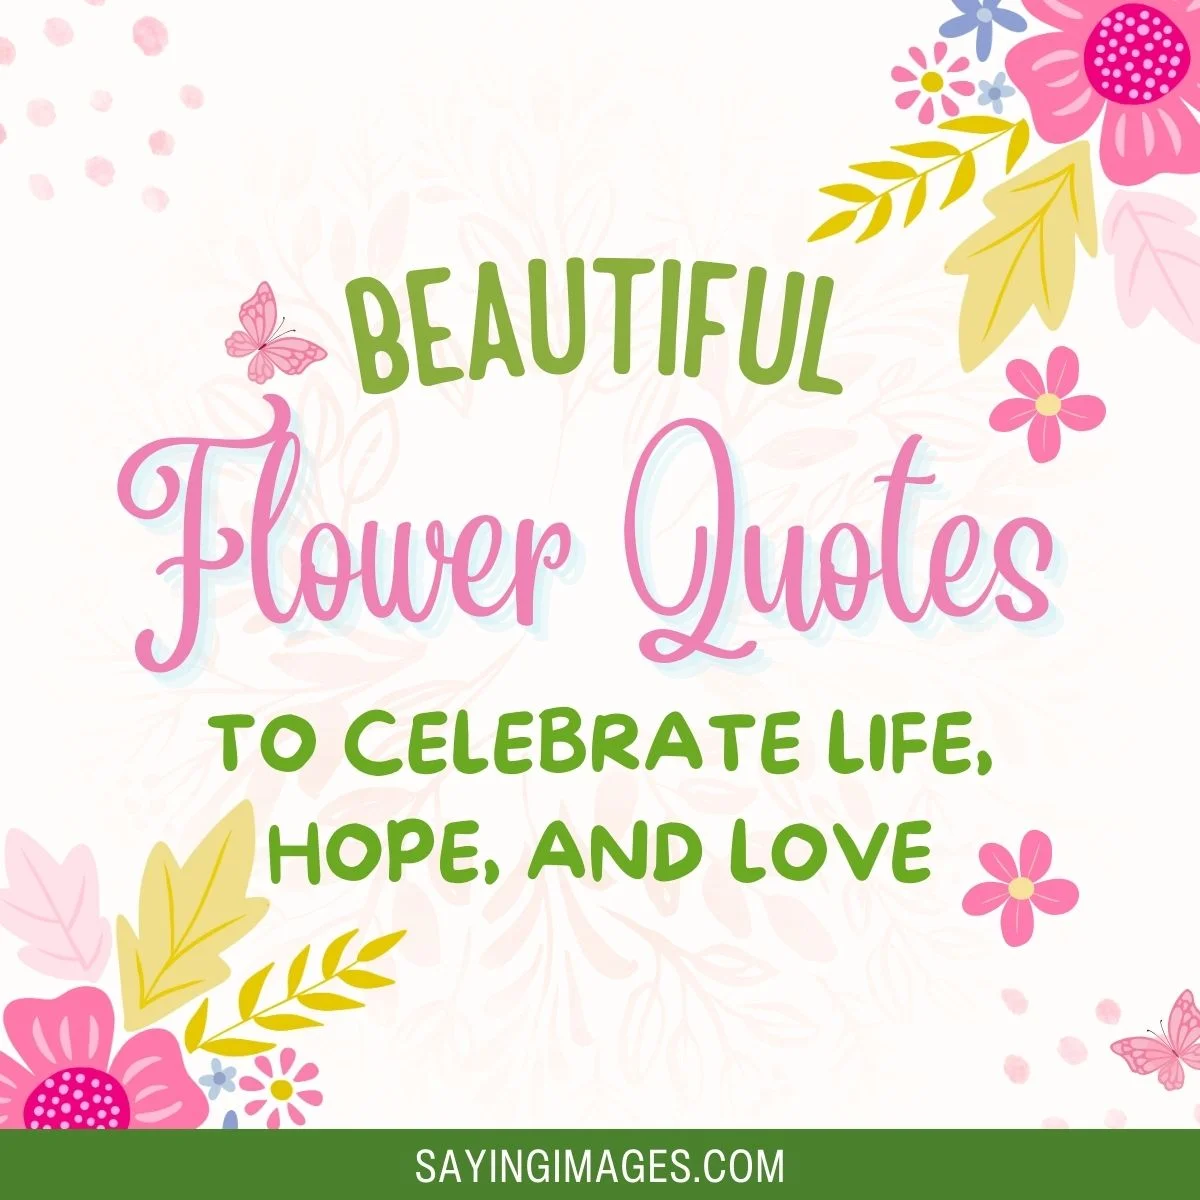 35 Beautiful Flower Quotes to Celebrate Life, Hope, and Love ...